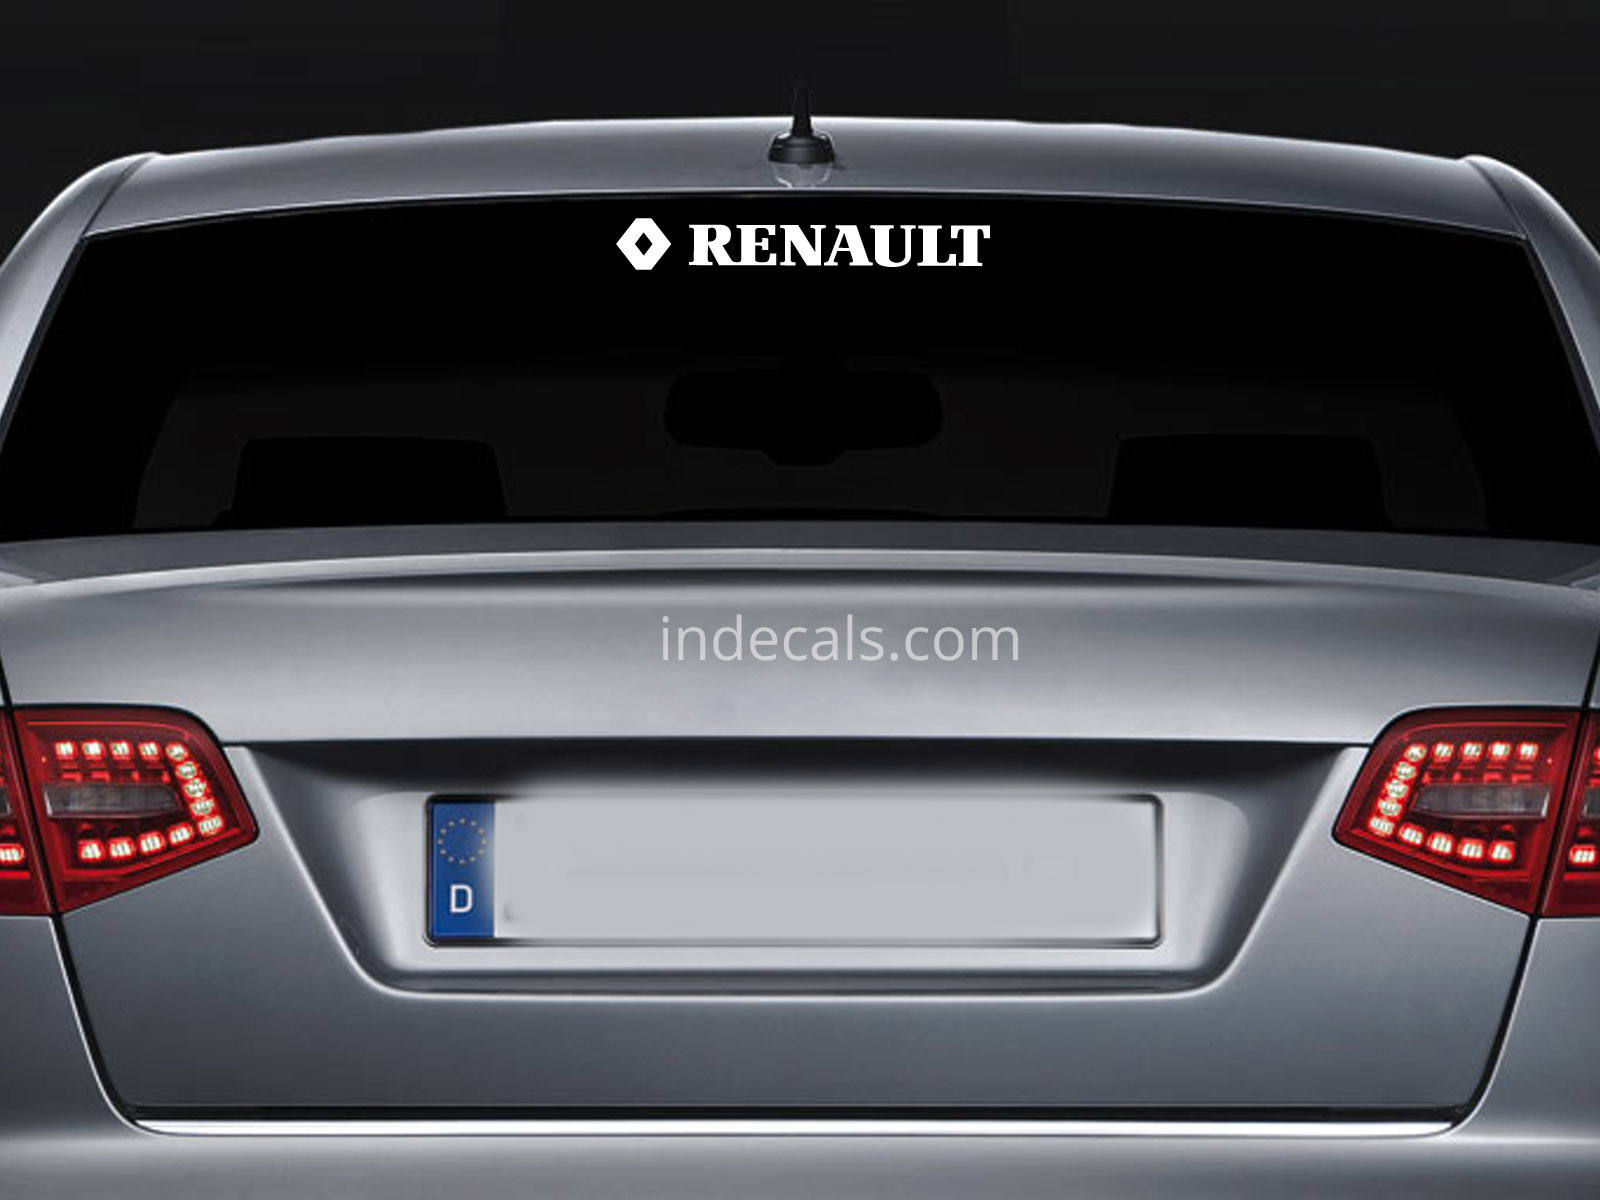 1 x Renault Sticker for Windshield or Back Window - White